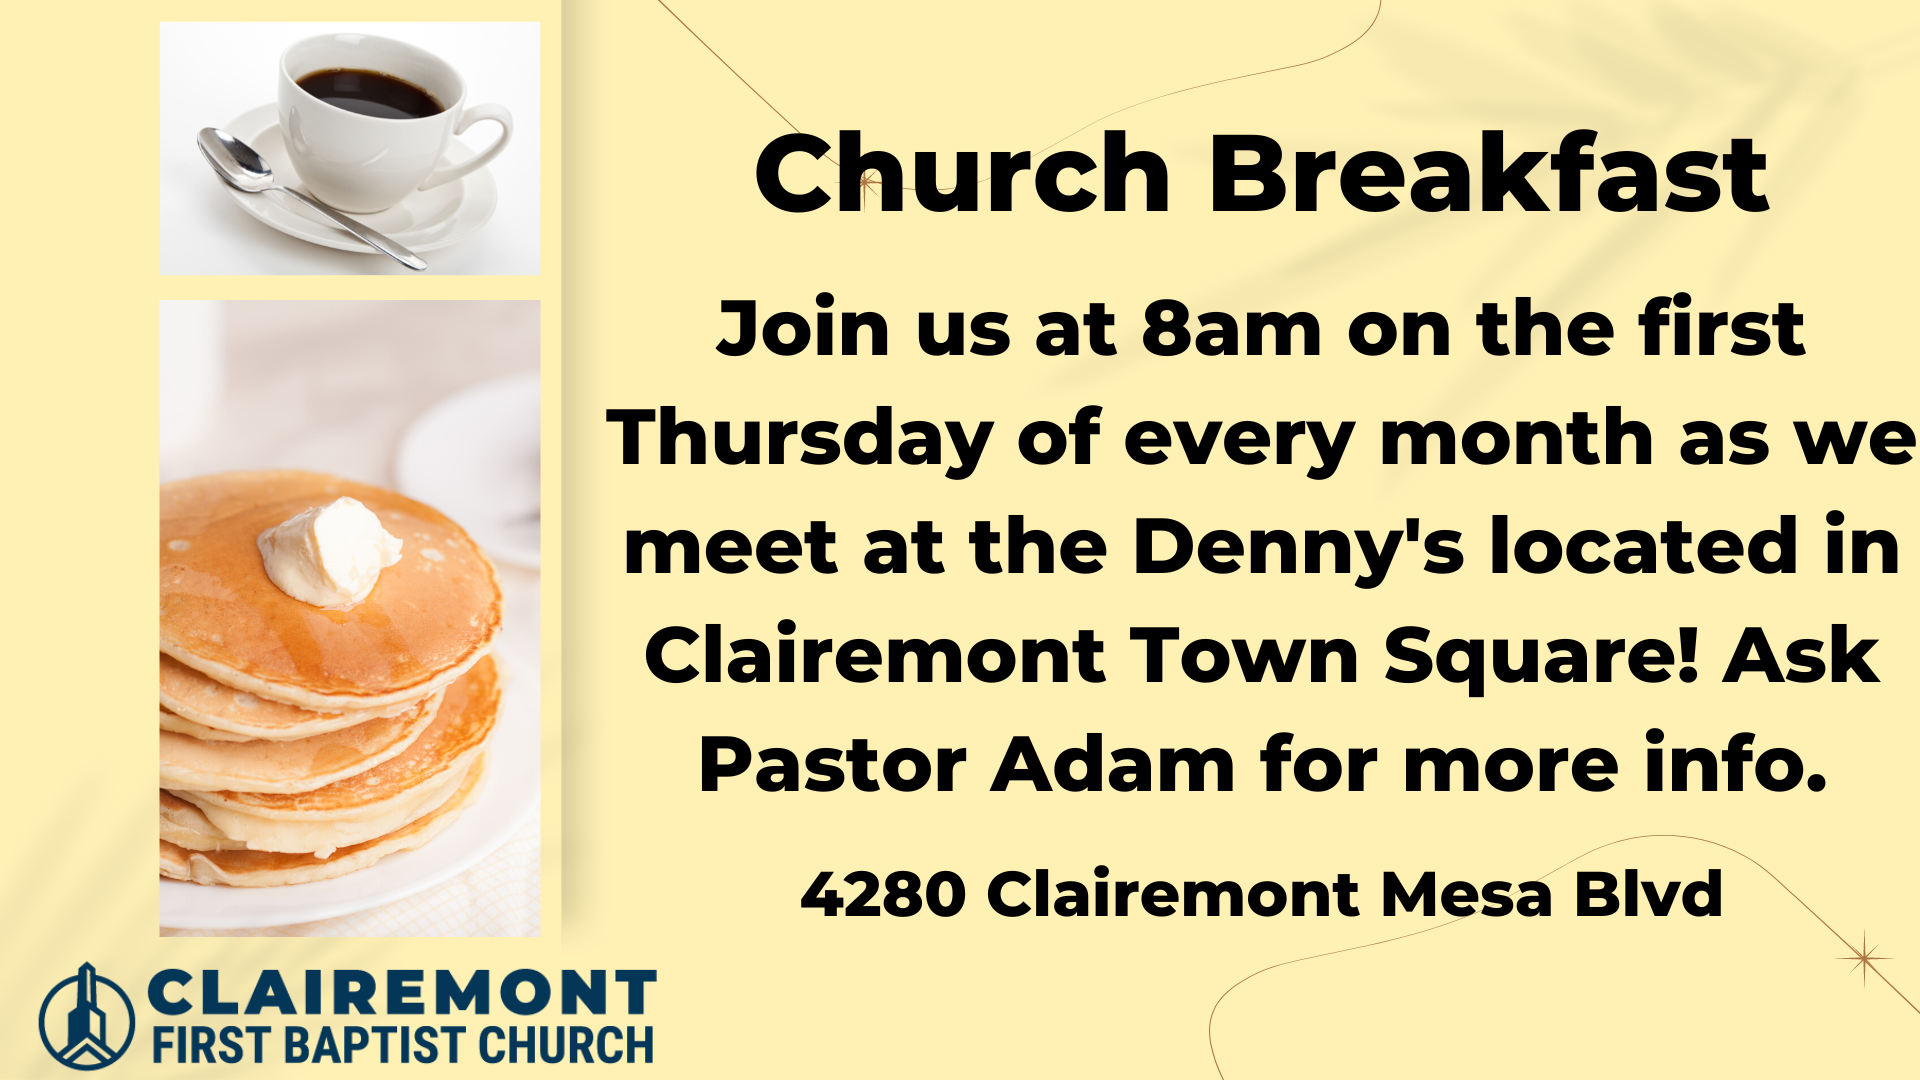 Join us at 8am on the first Thursday of every month as we meet at the Denny's located in Clairemont Town Square! Ask Pastor Adam for more info. 4280 Clairemont Mesa Blvd.